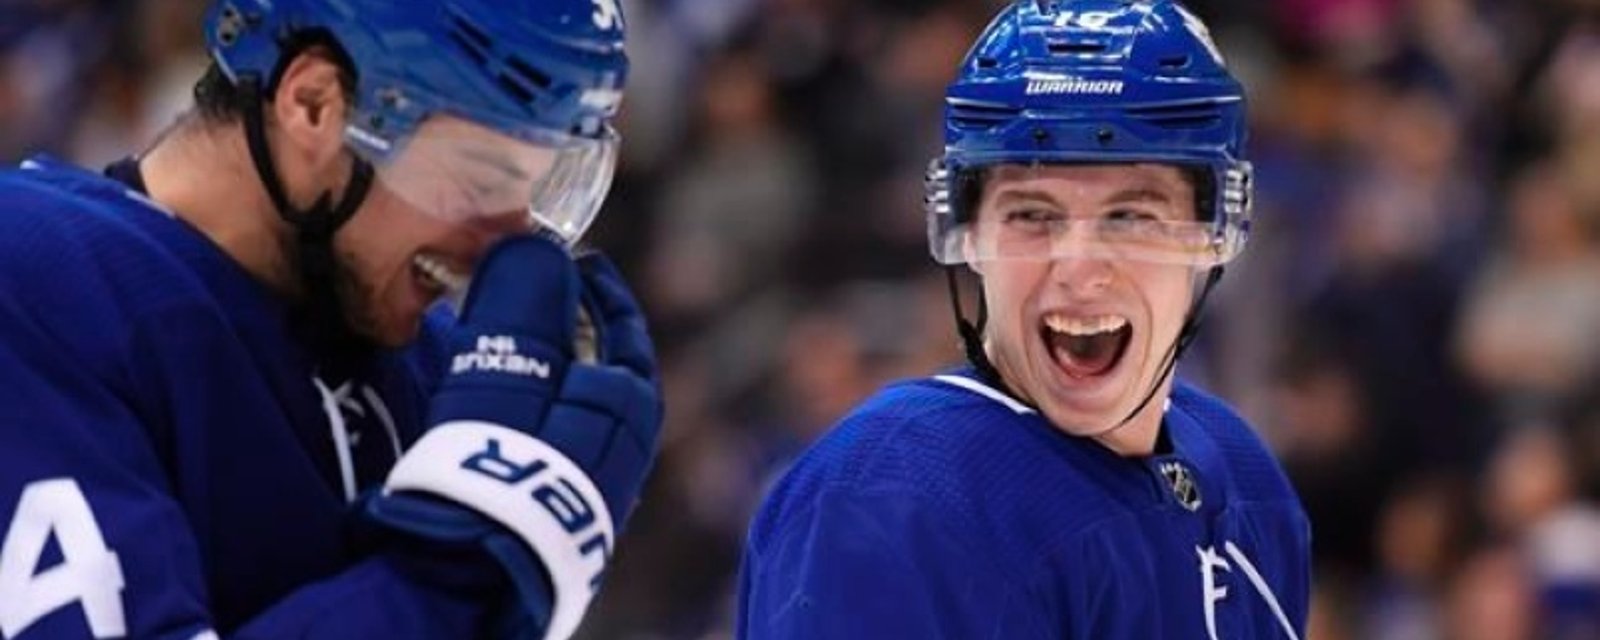 Toronto burger chain promises Marner free cheeseburgers for life if he re-signs